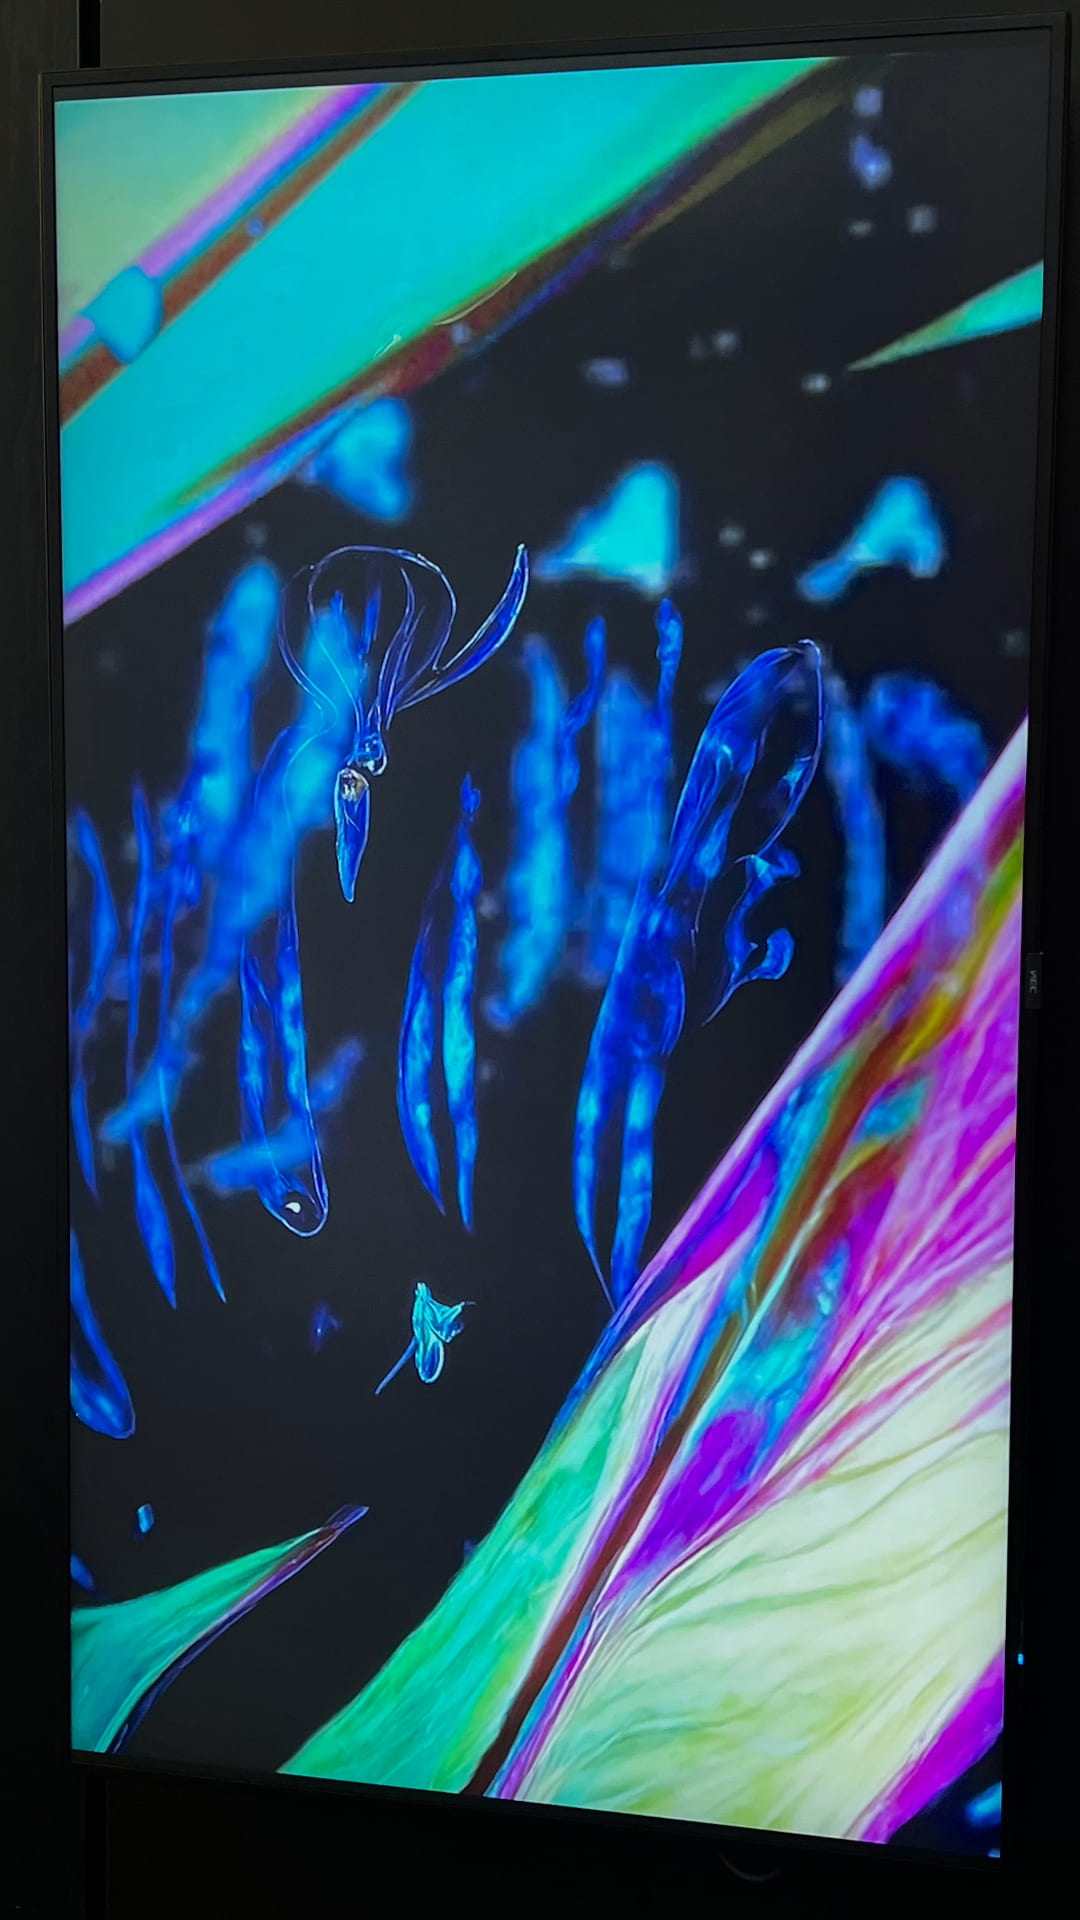 Photograph of an LED screen displaying a video of rainbow lenticular colour shifting squid and plankton